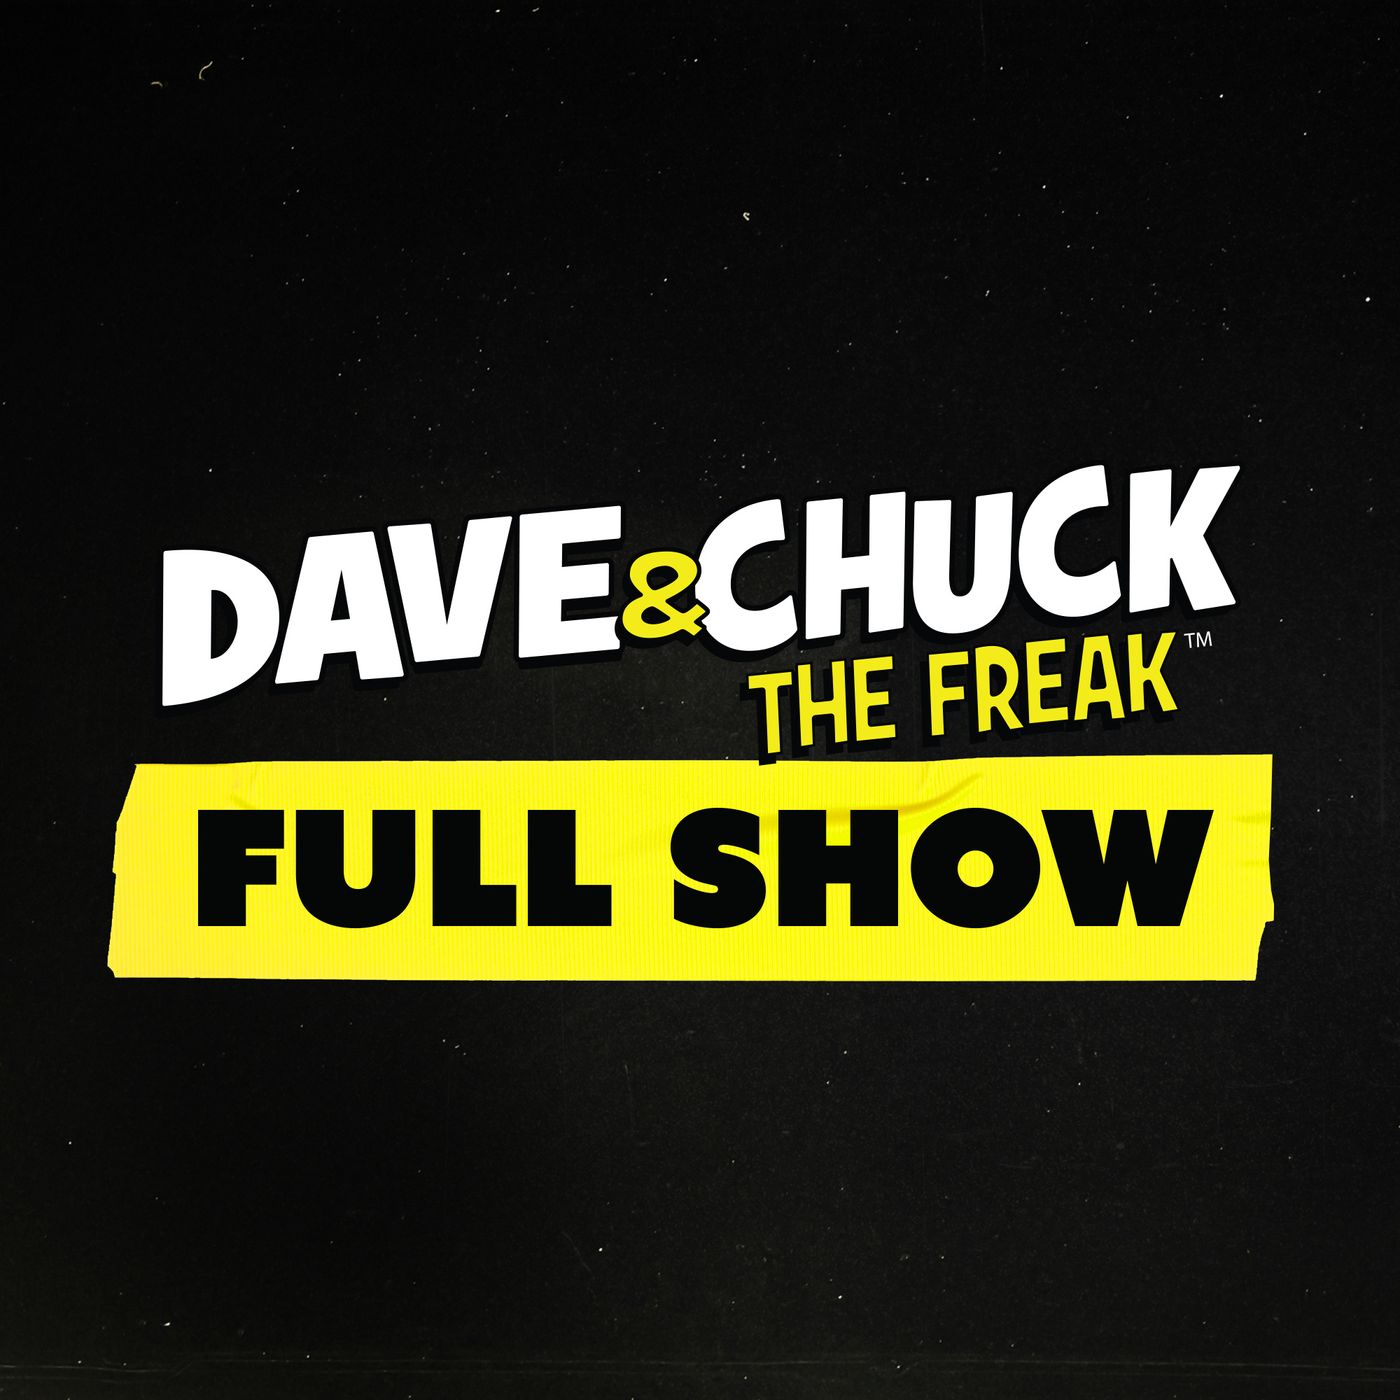 Tuesday, May 16th 2023 Dave & Chuck the Freak Full Show